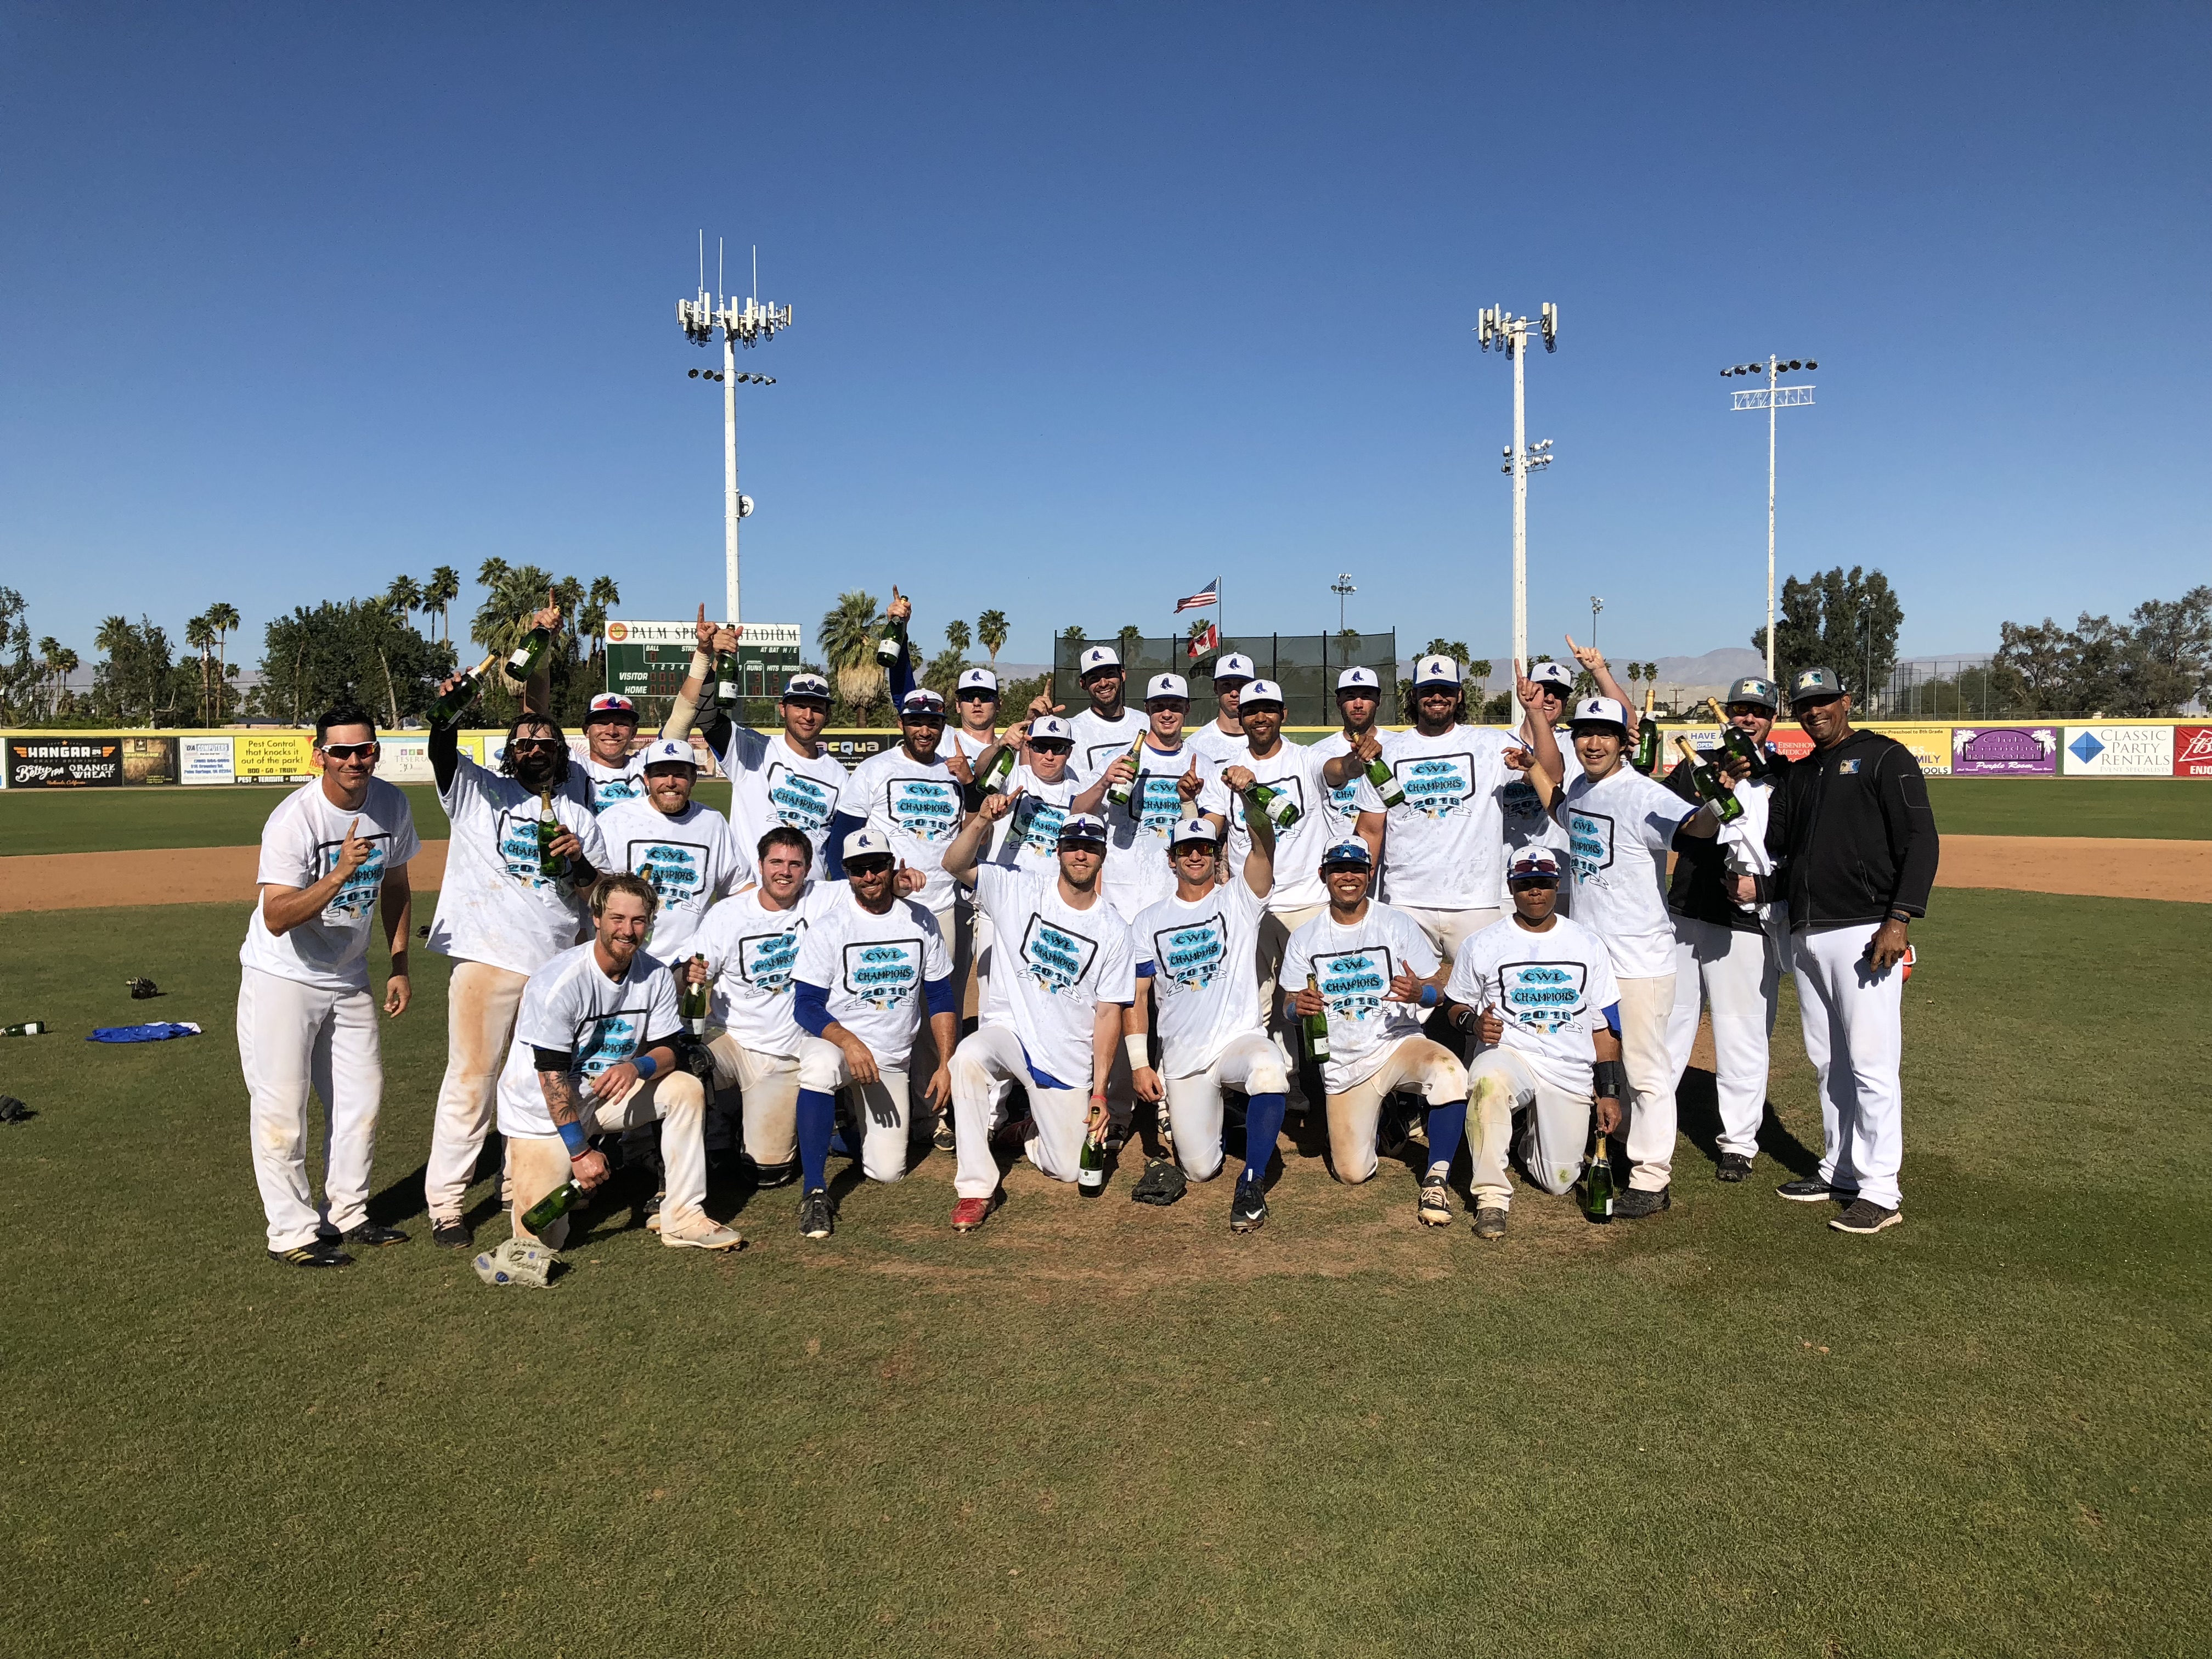 Blue Sox overpower North Stars in CWL Championship